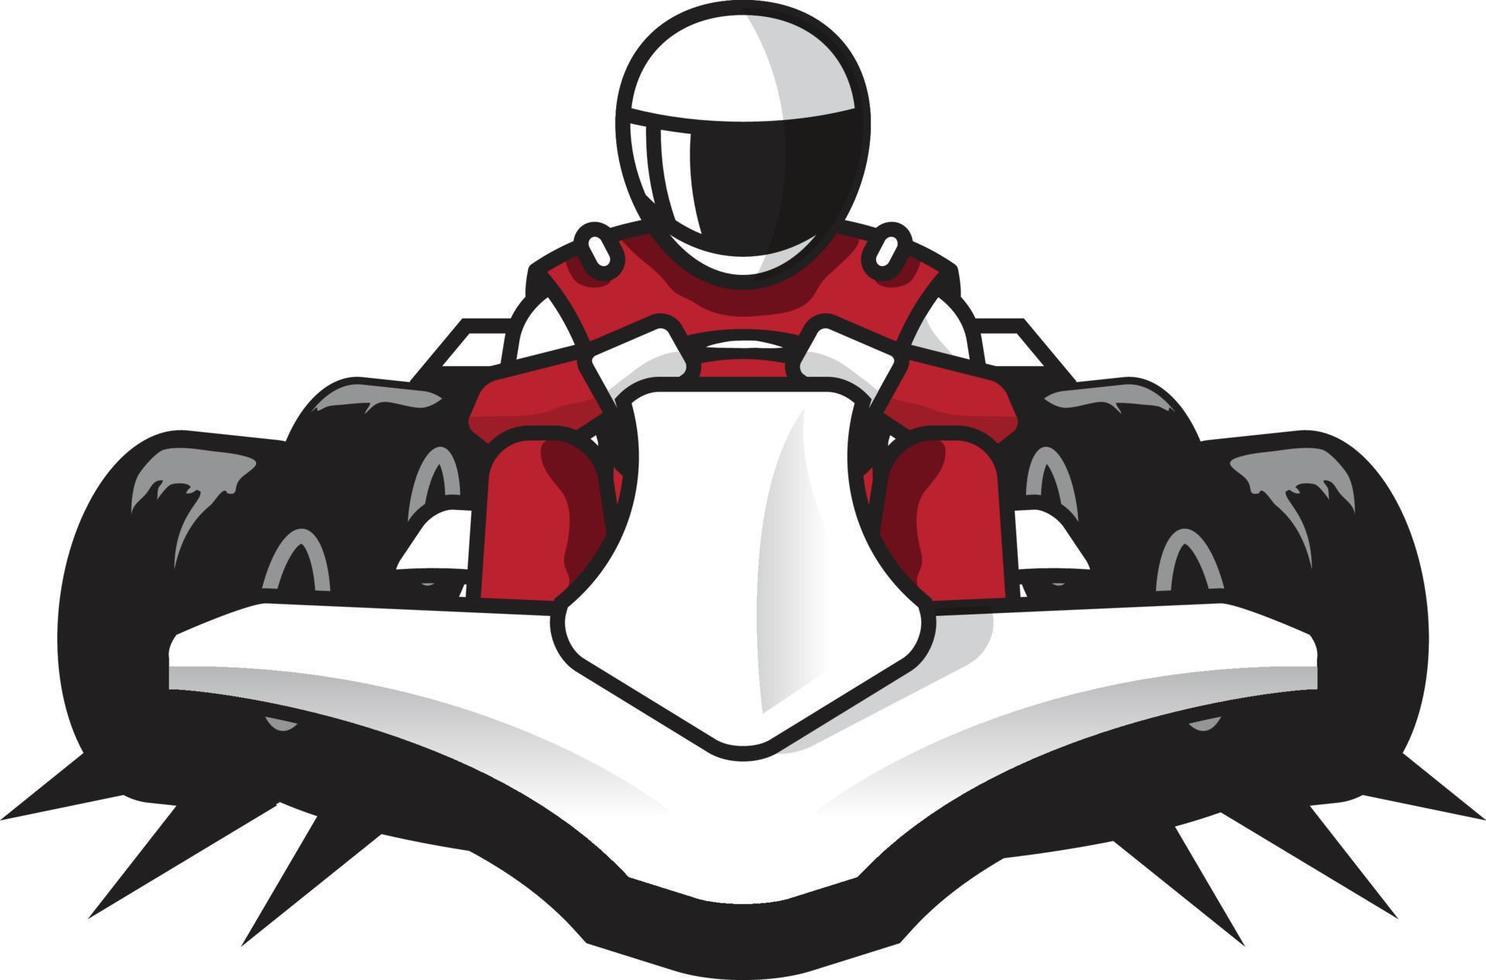 A go kart racer in red suit and a helmet vector